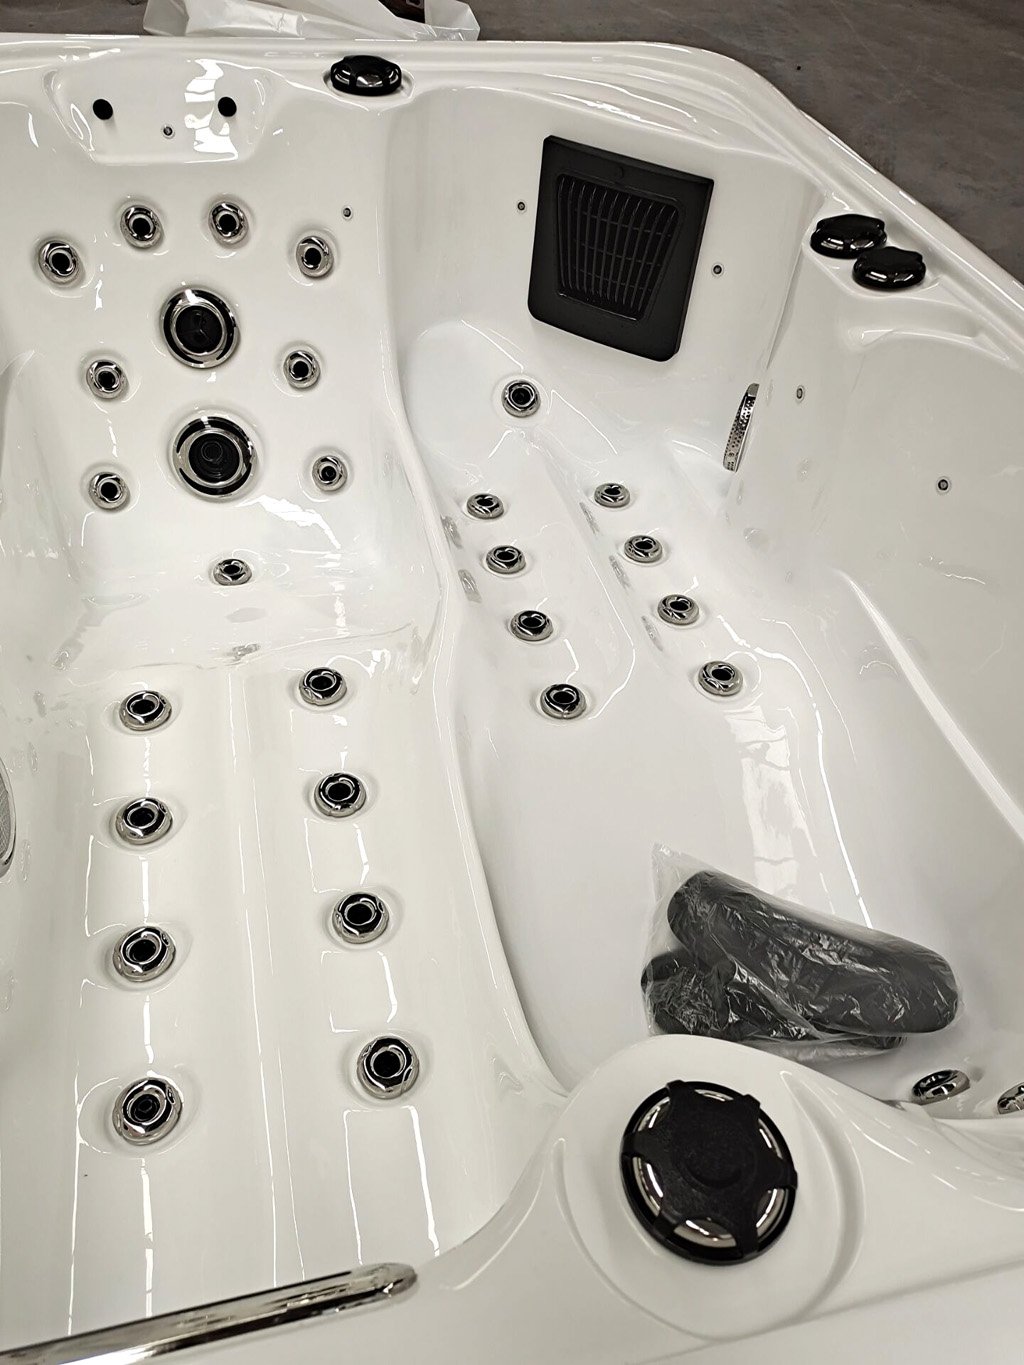 2 Person Outdoor Hydrotherapy Bathtub Hot Tub Bath Whirlpool Spa With 41 Jets And 31 Color Leds 